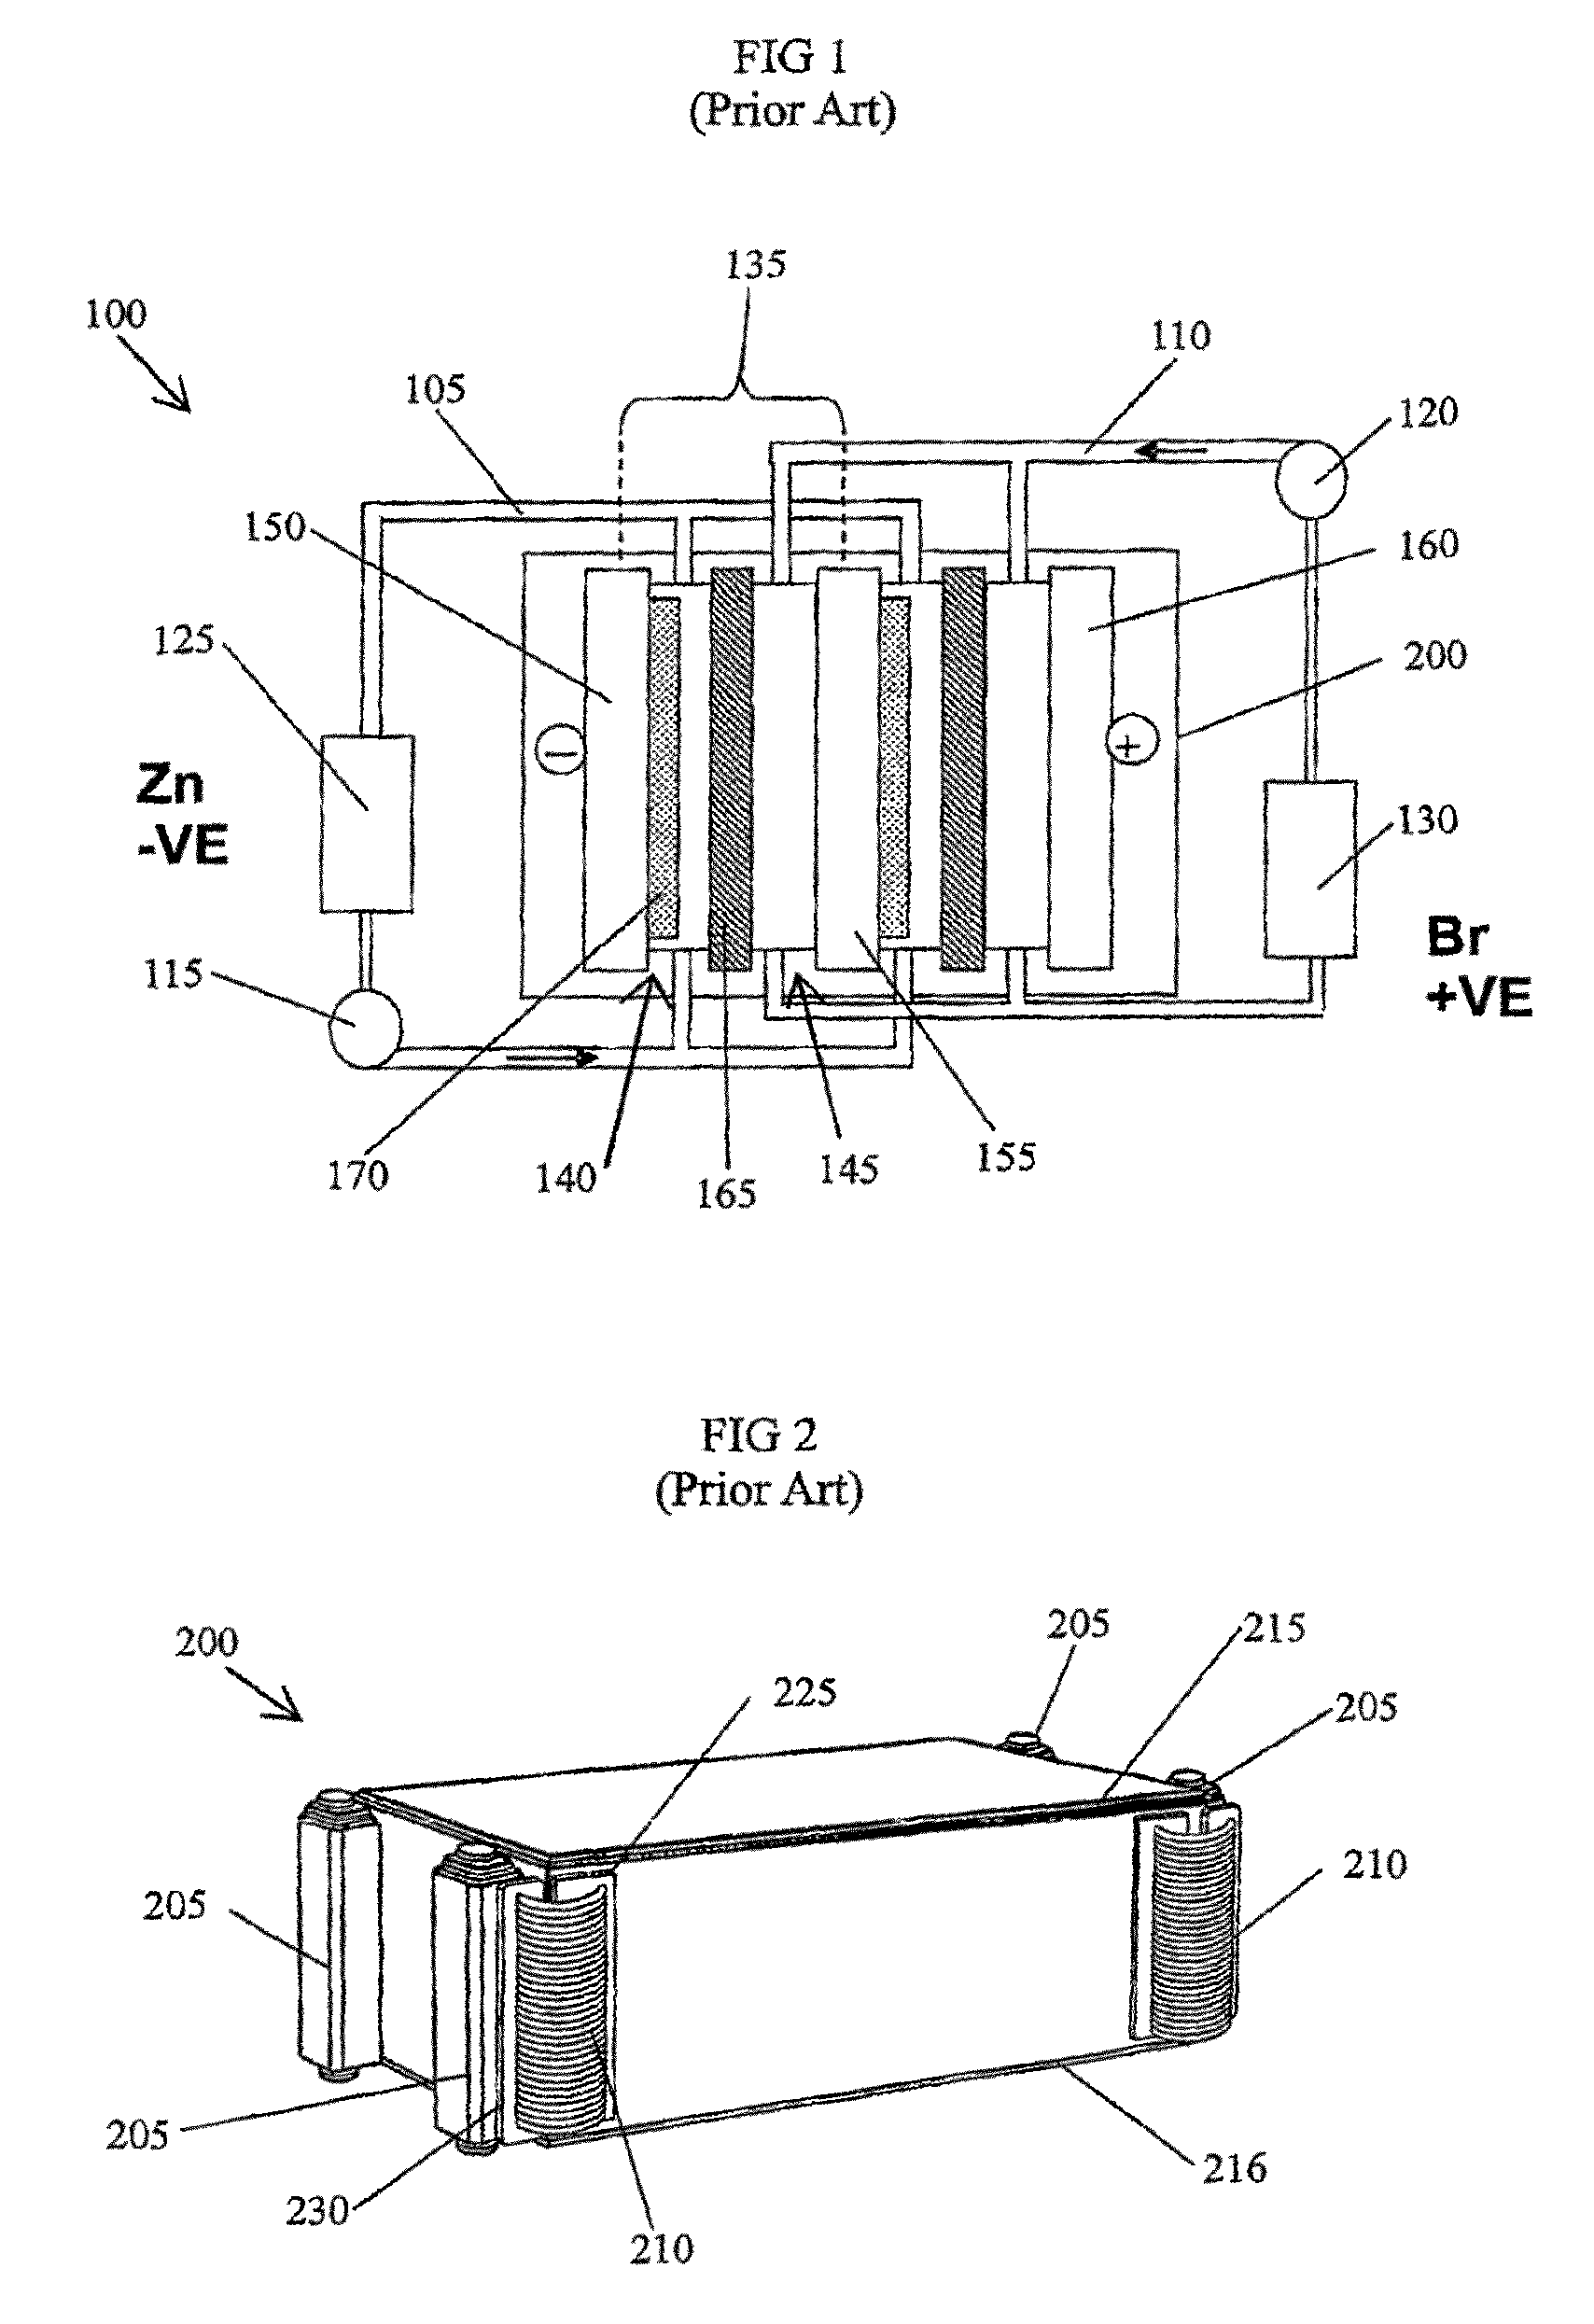 Cell stack for a flowing electrolyte battery